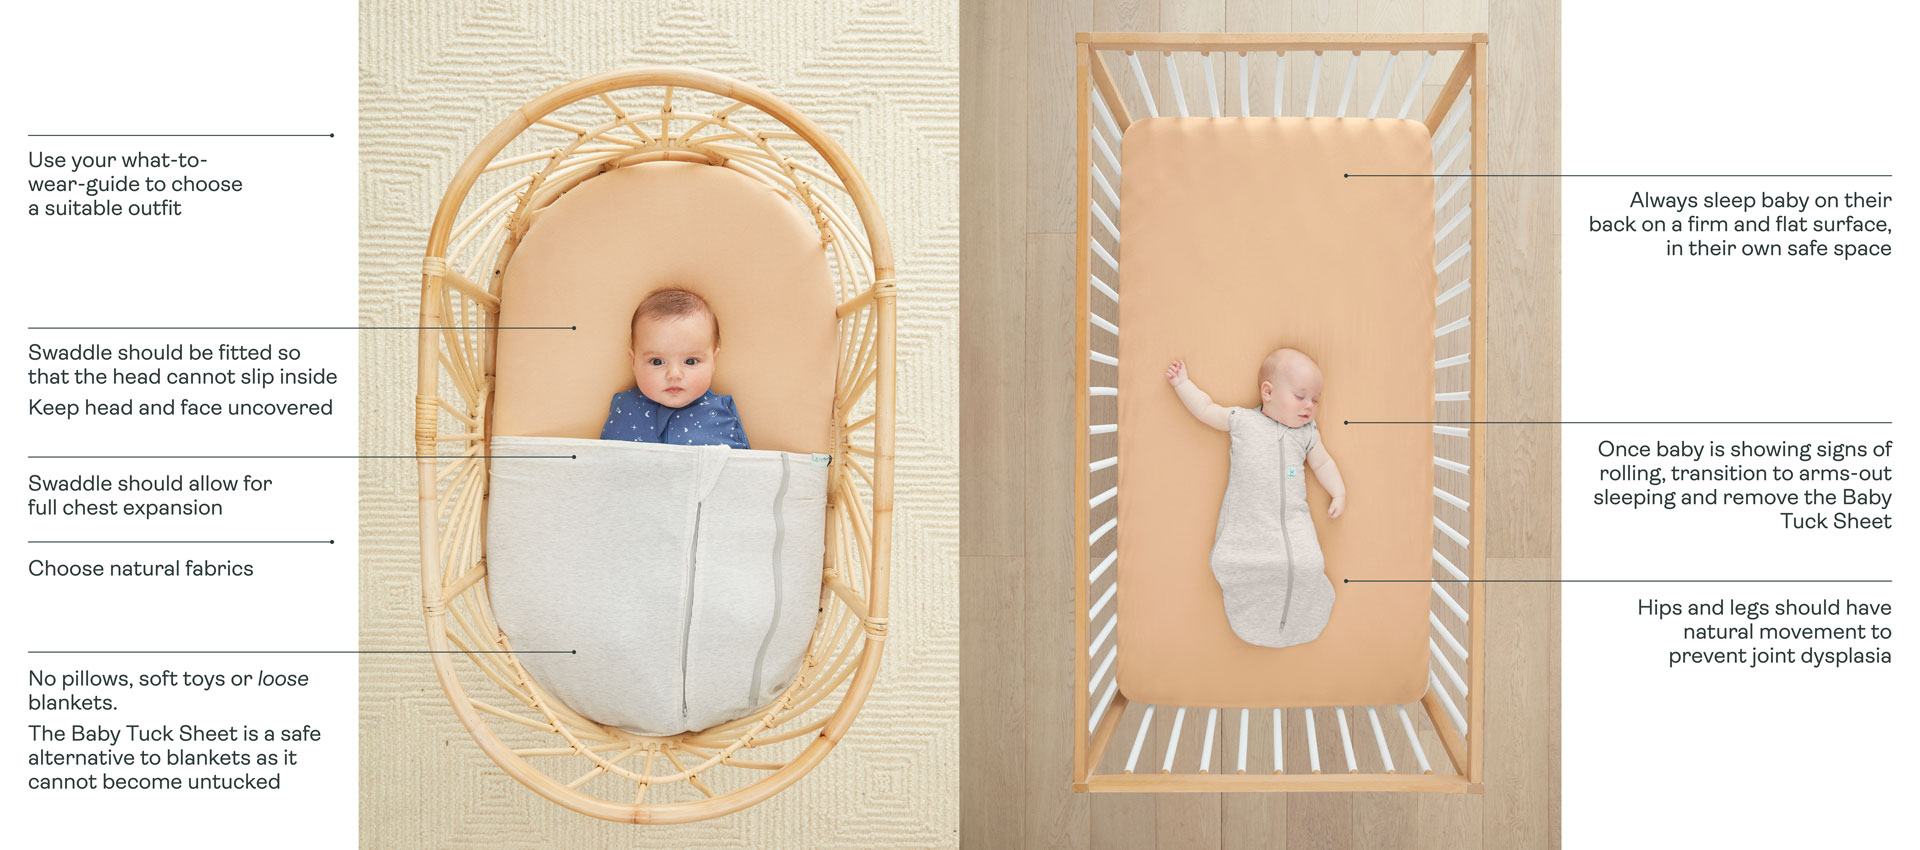 How to safely sleep a newborn in a bassinet or crib